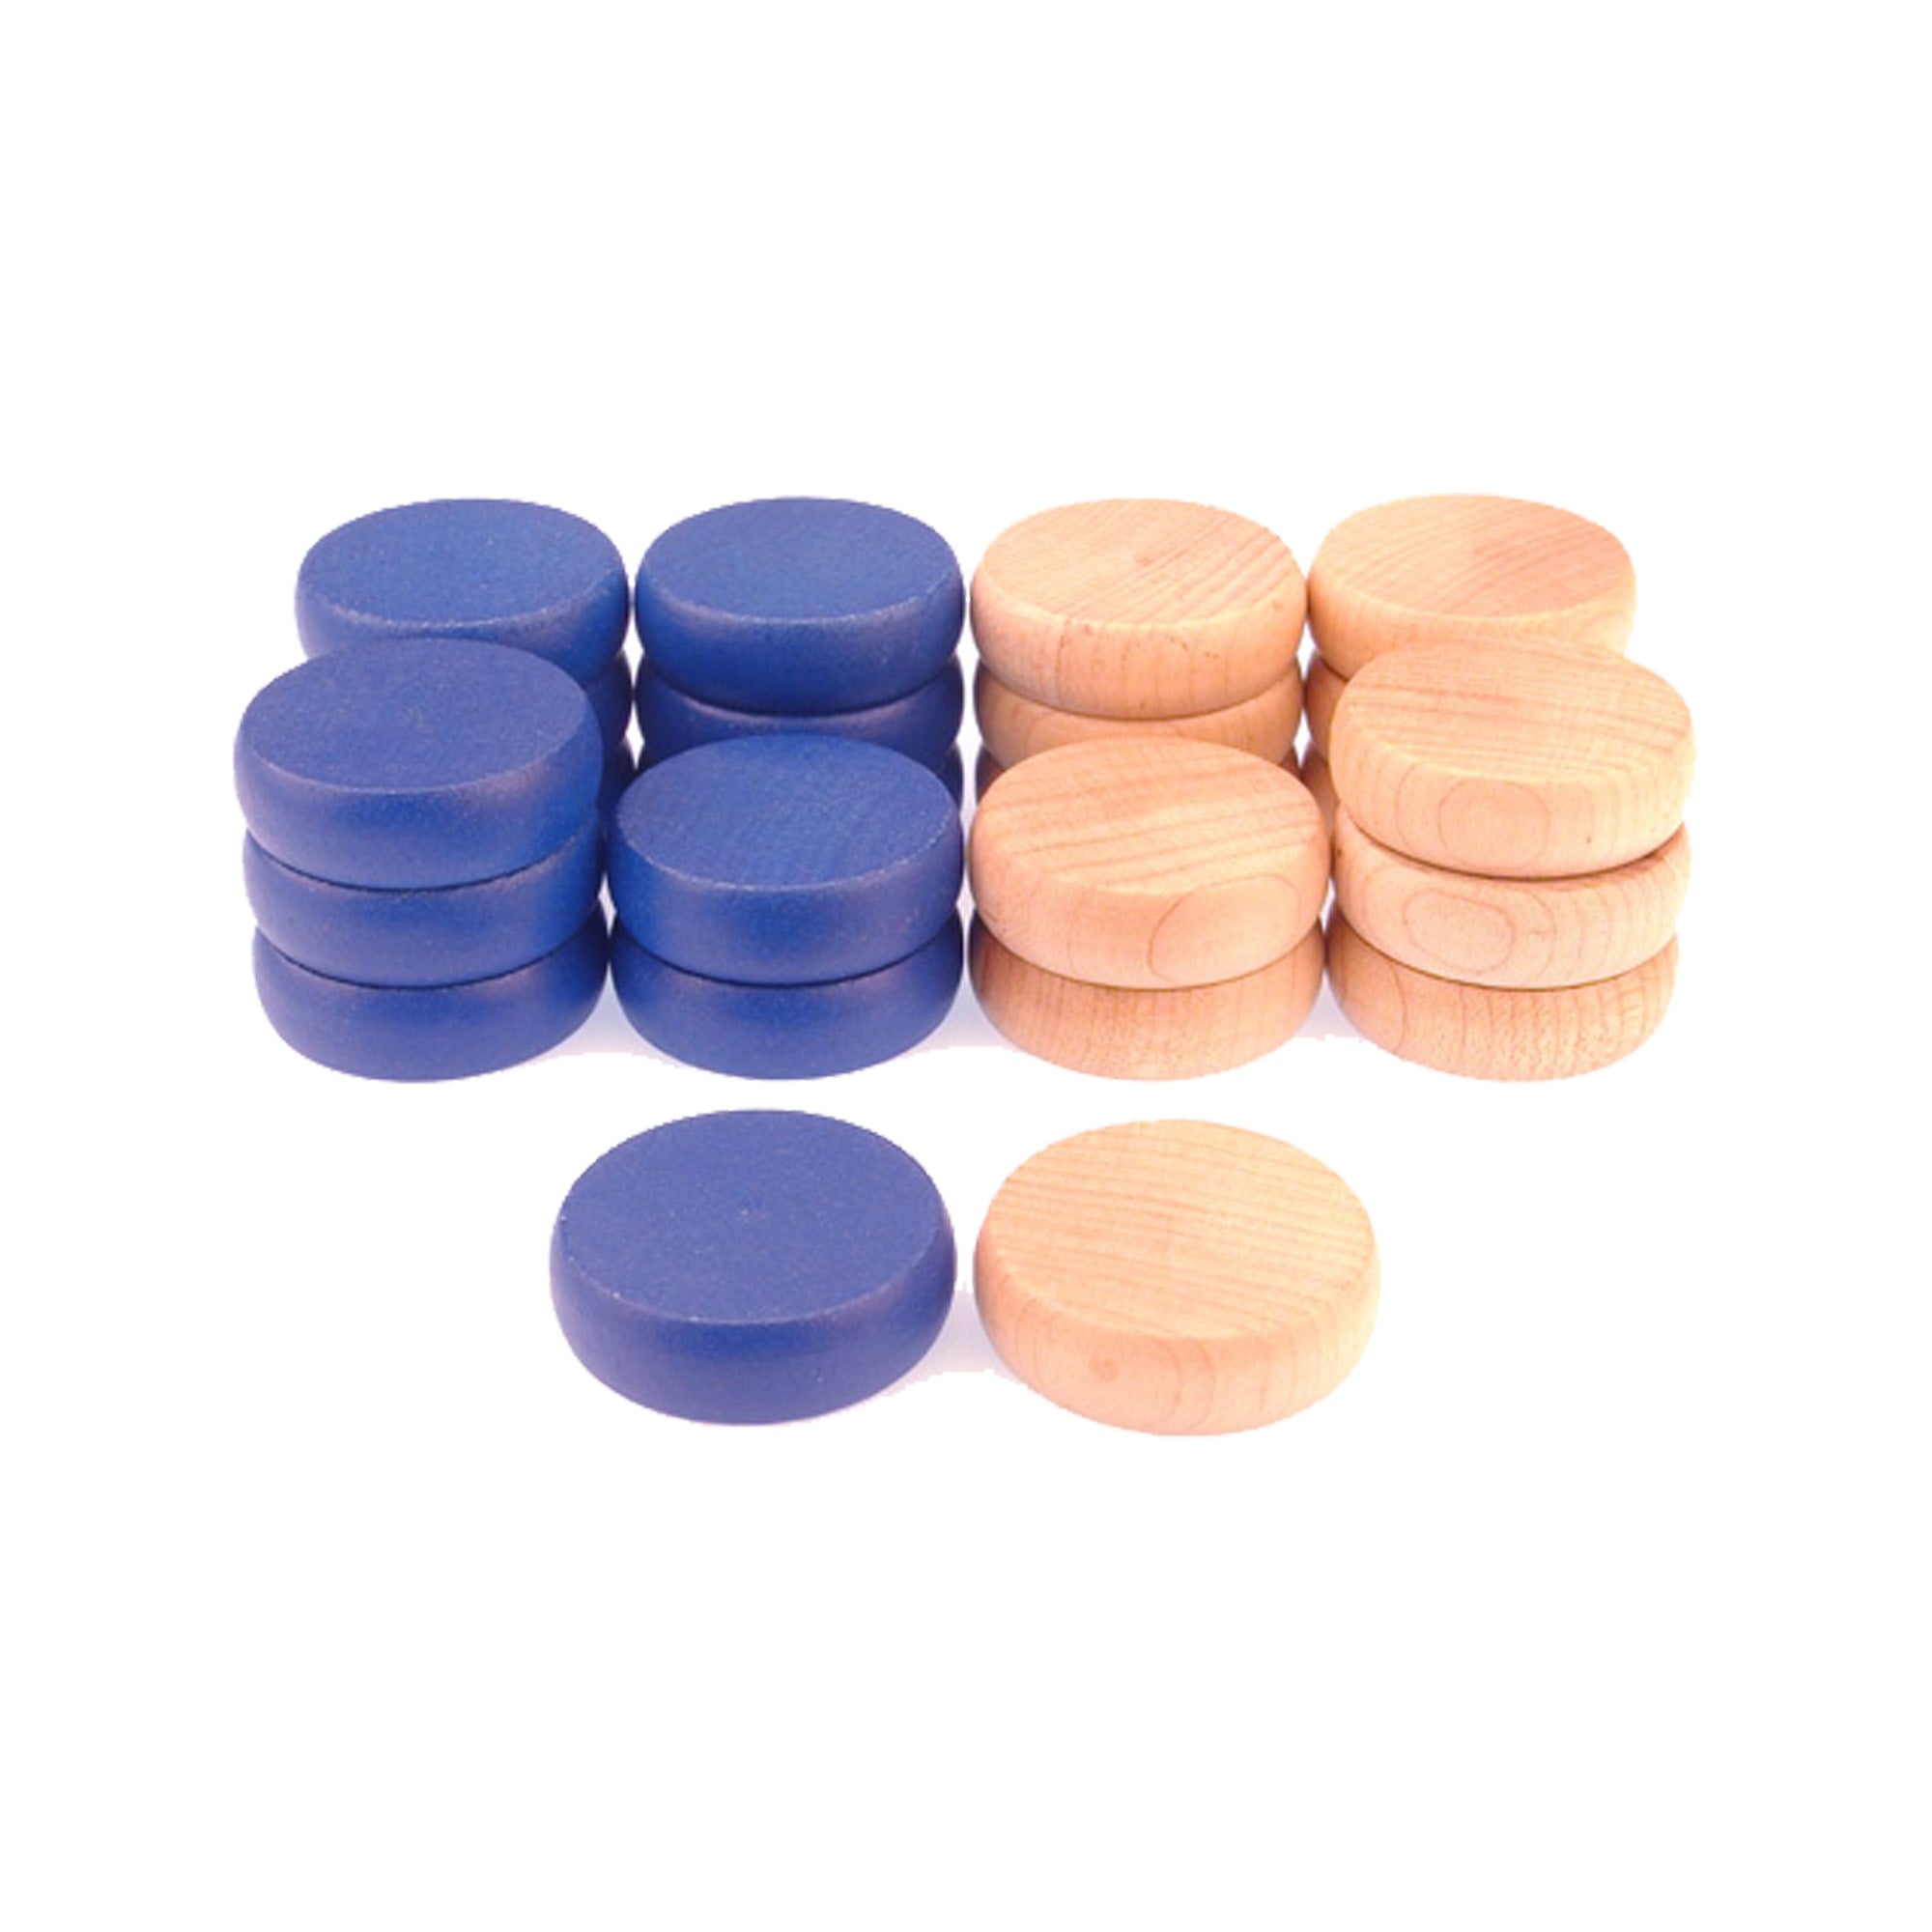 Crokinole Tournament Discs - 13 Blue and 13 Wooden - Size 1-1/4" - 24 Needed + 2 Spare Discs - Bag Included - Carrom Alternative